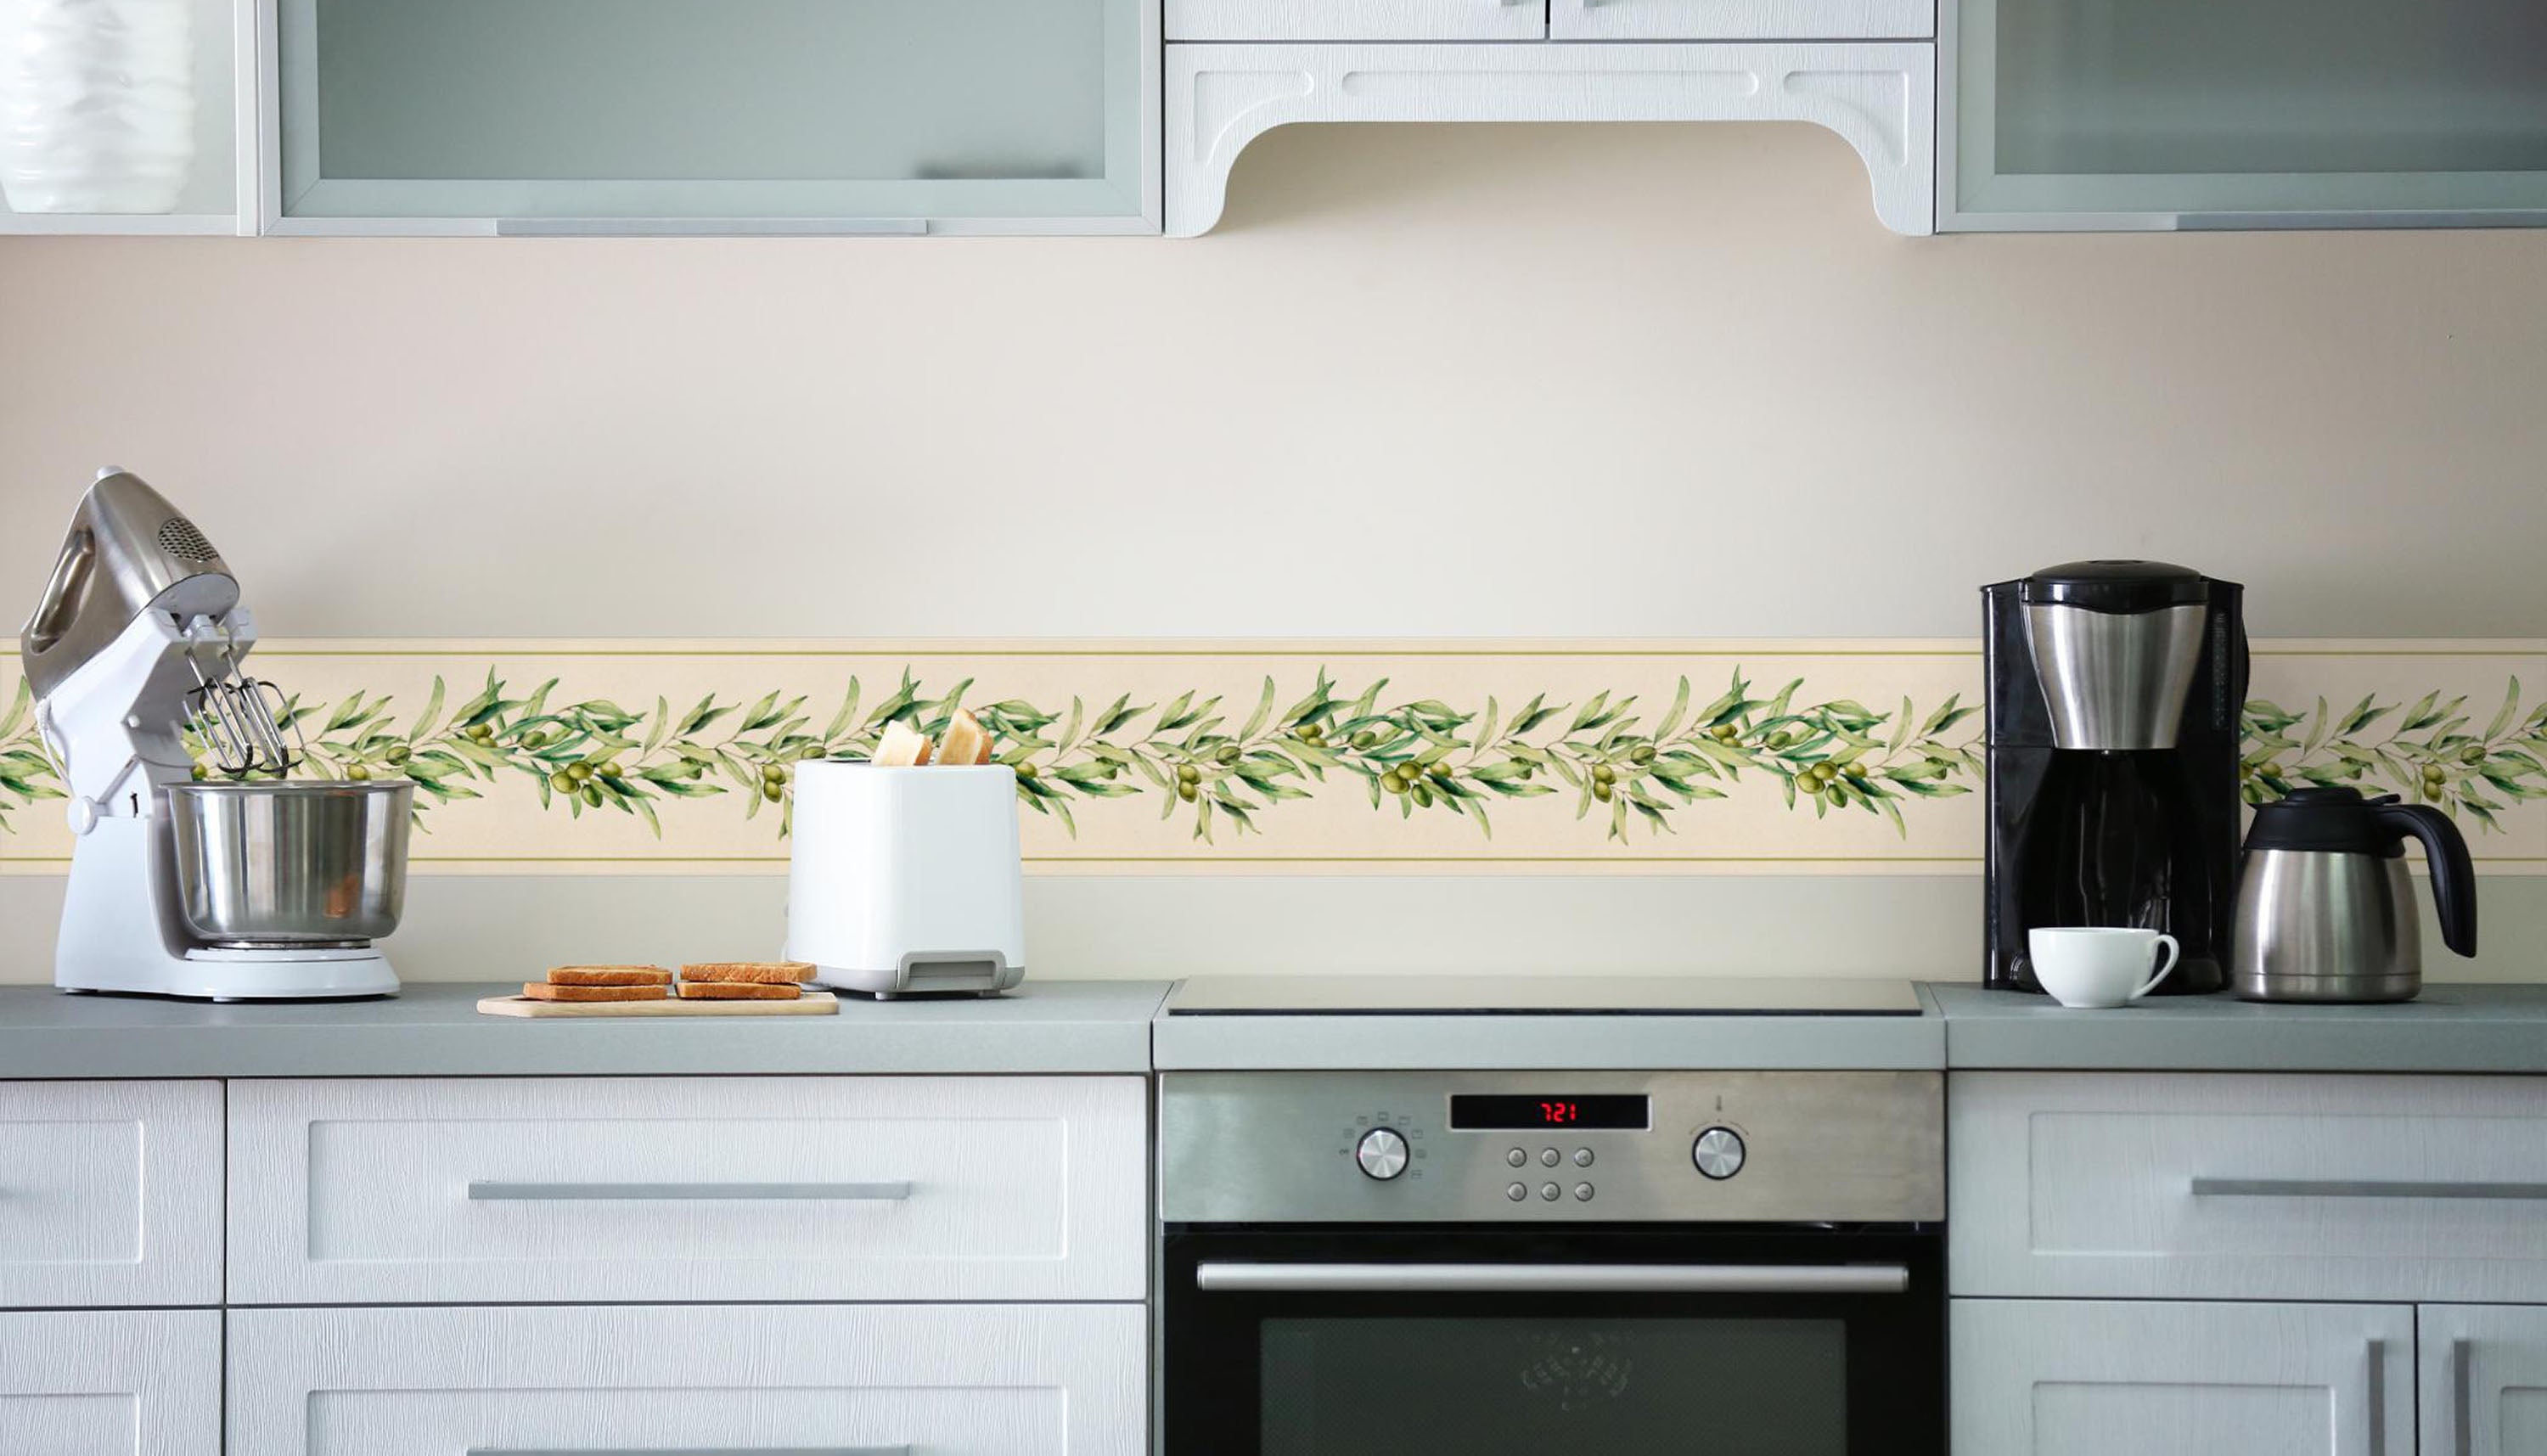 GB50140g8 Grace & Gardenia Olive Branch Peel and Stick Wallpaper Border 8in Height x 18ft Long, Beige Green